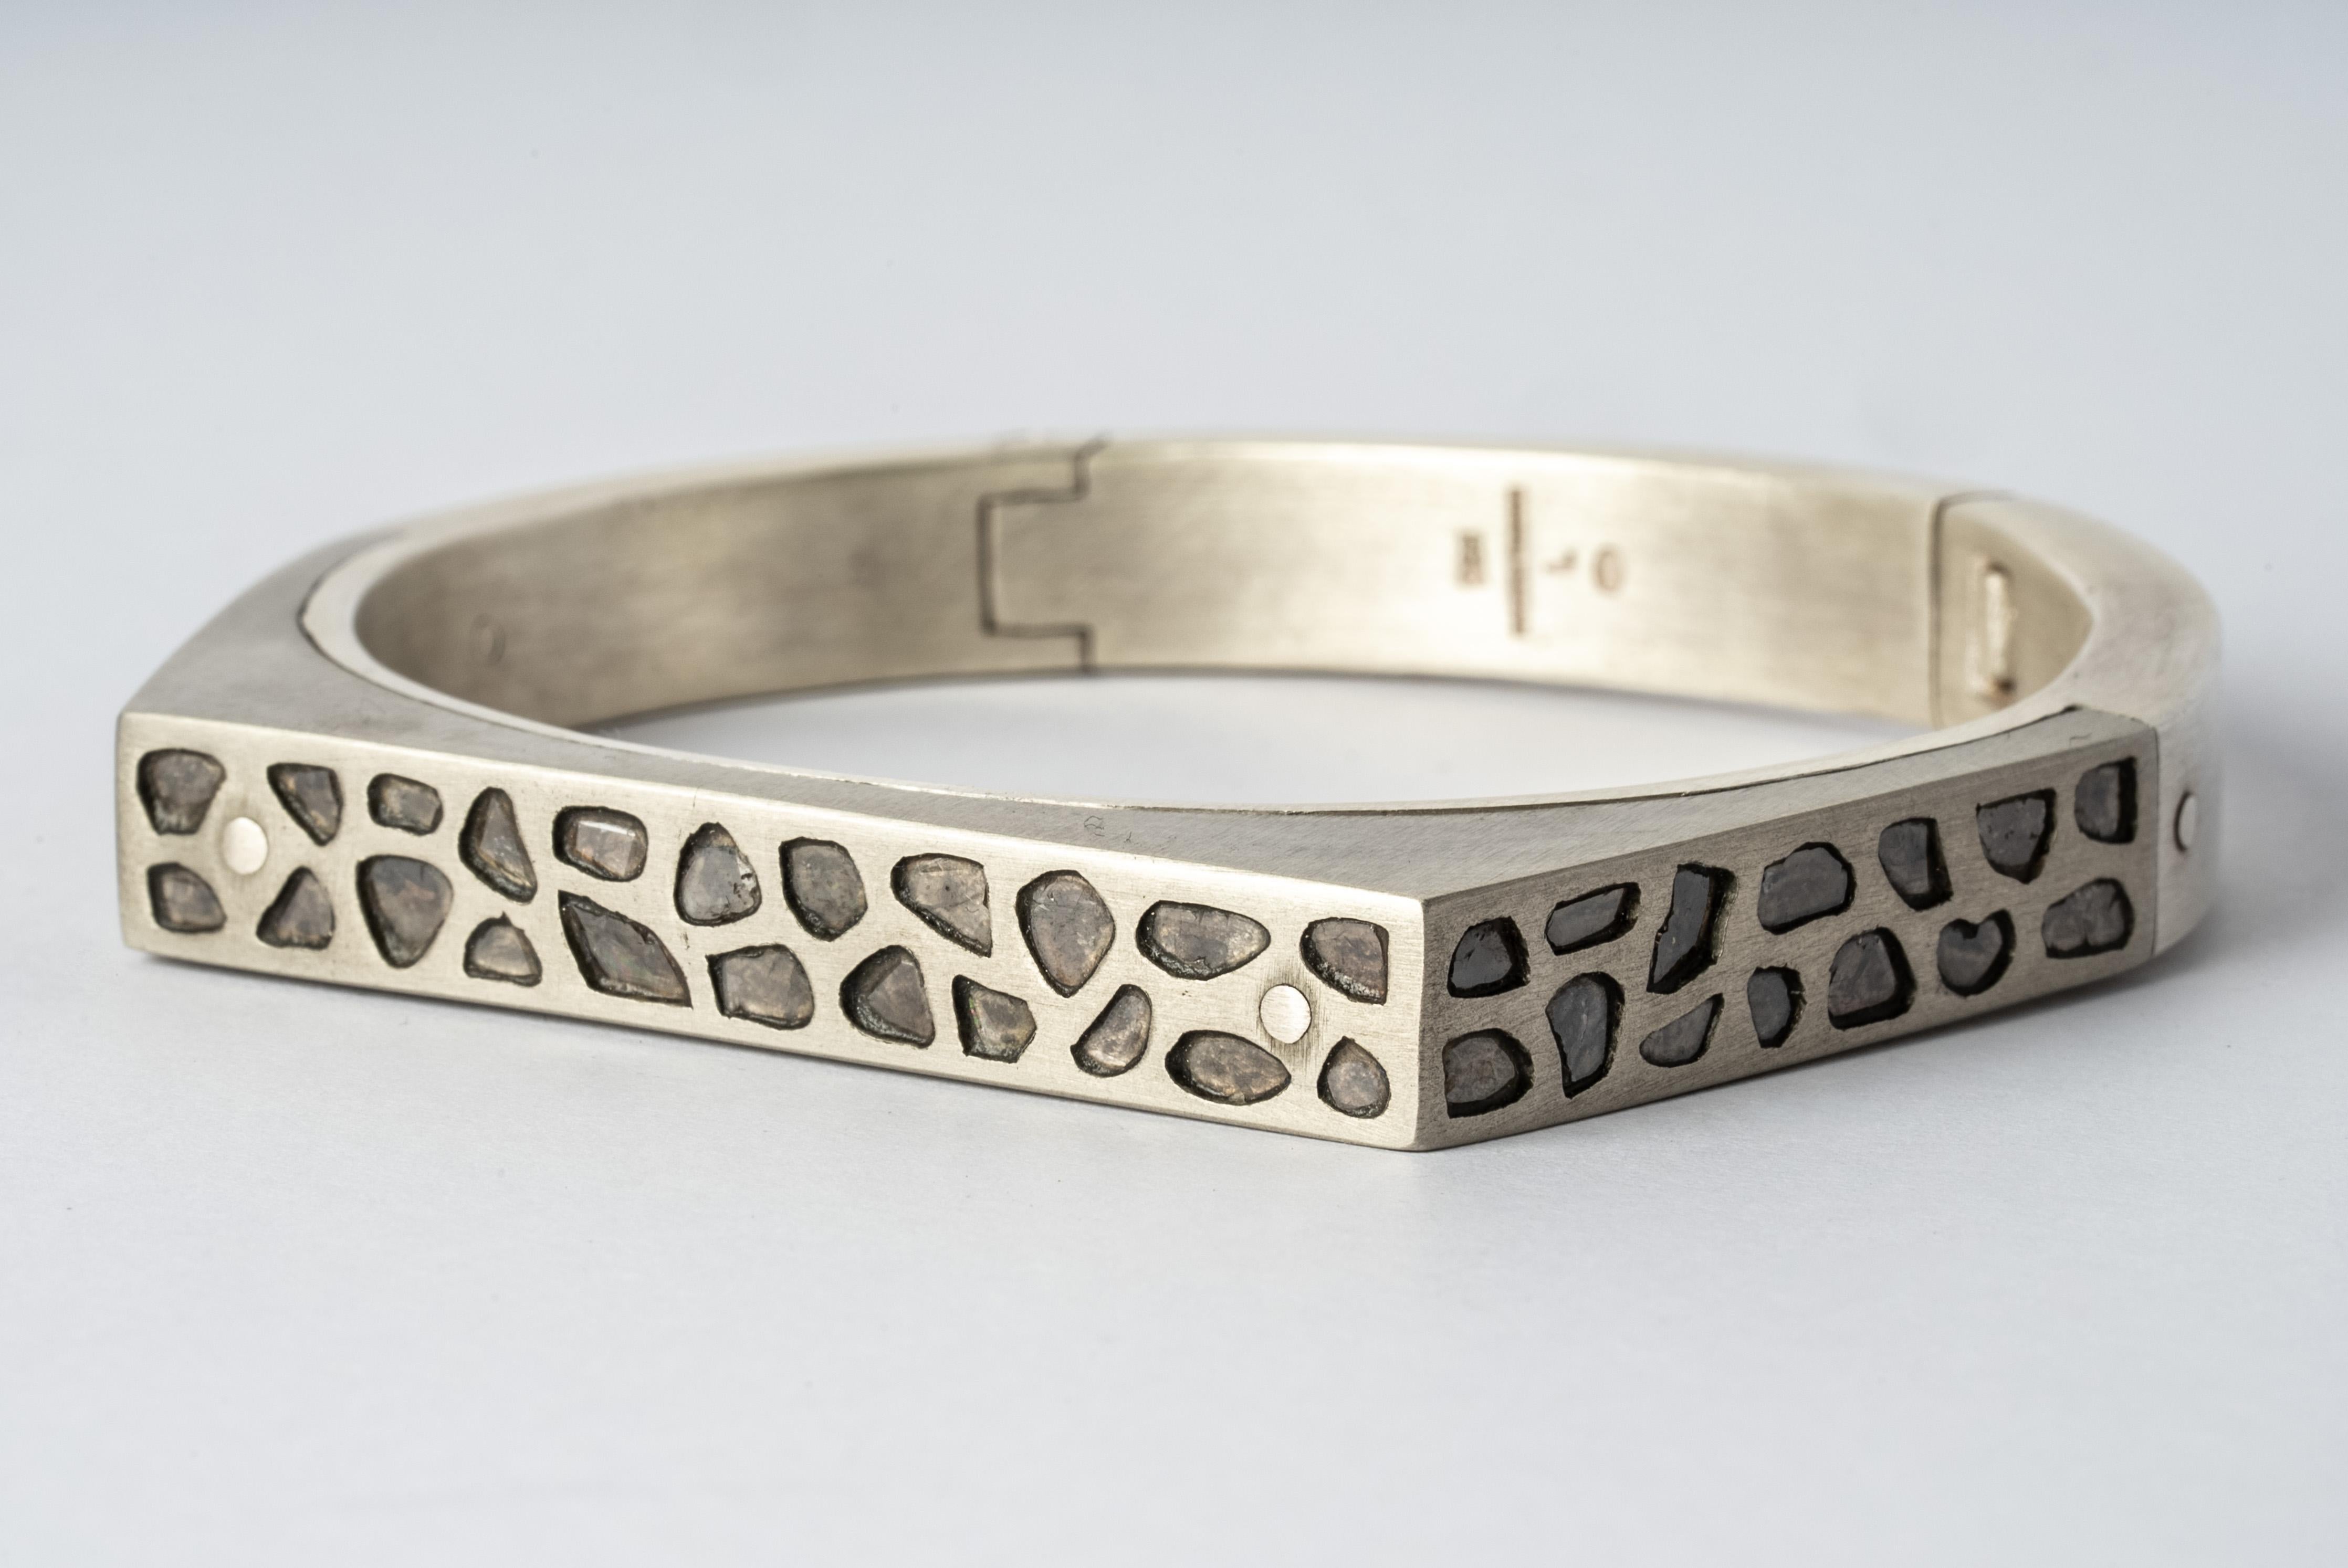 Bracelet in sterling silver, bronze and slabs of rough diamond set in mega pave setting. These slabs are removed from a larger chunk of diamond. This item is made with a naturally occurring element and will vary from the photograph you see. Each